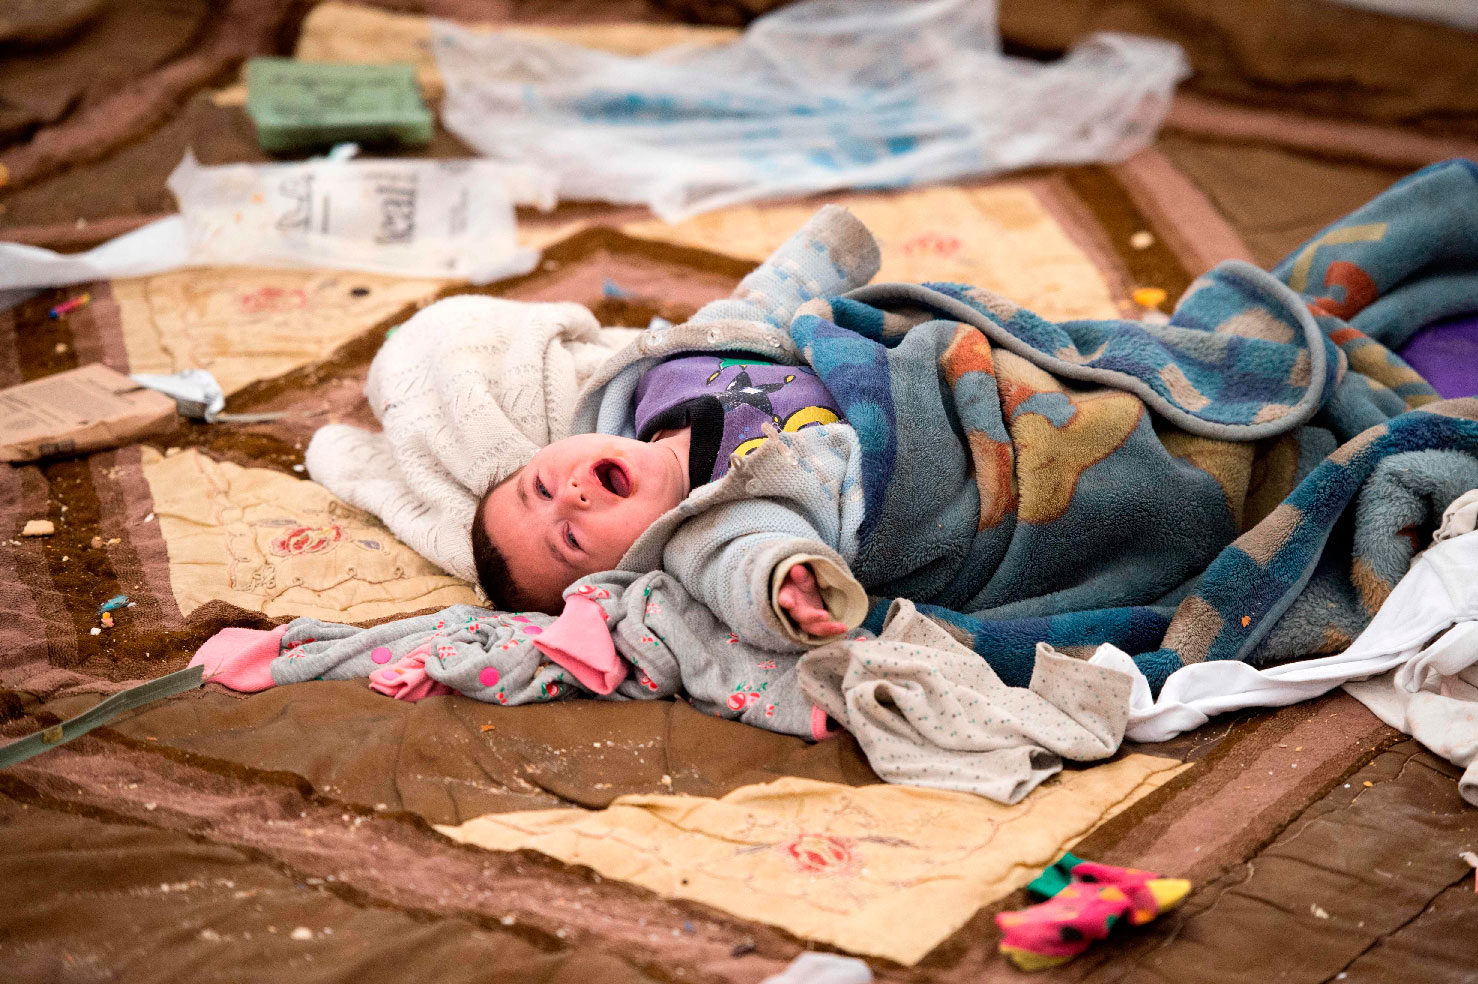 A baby cries at the Internally Displaced Persons (IDP) camp of al-Hol in al-Hasakeh governorate in northeastern Syria on February 6, 2019.